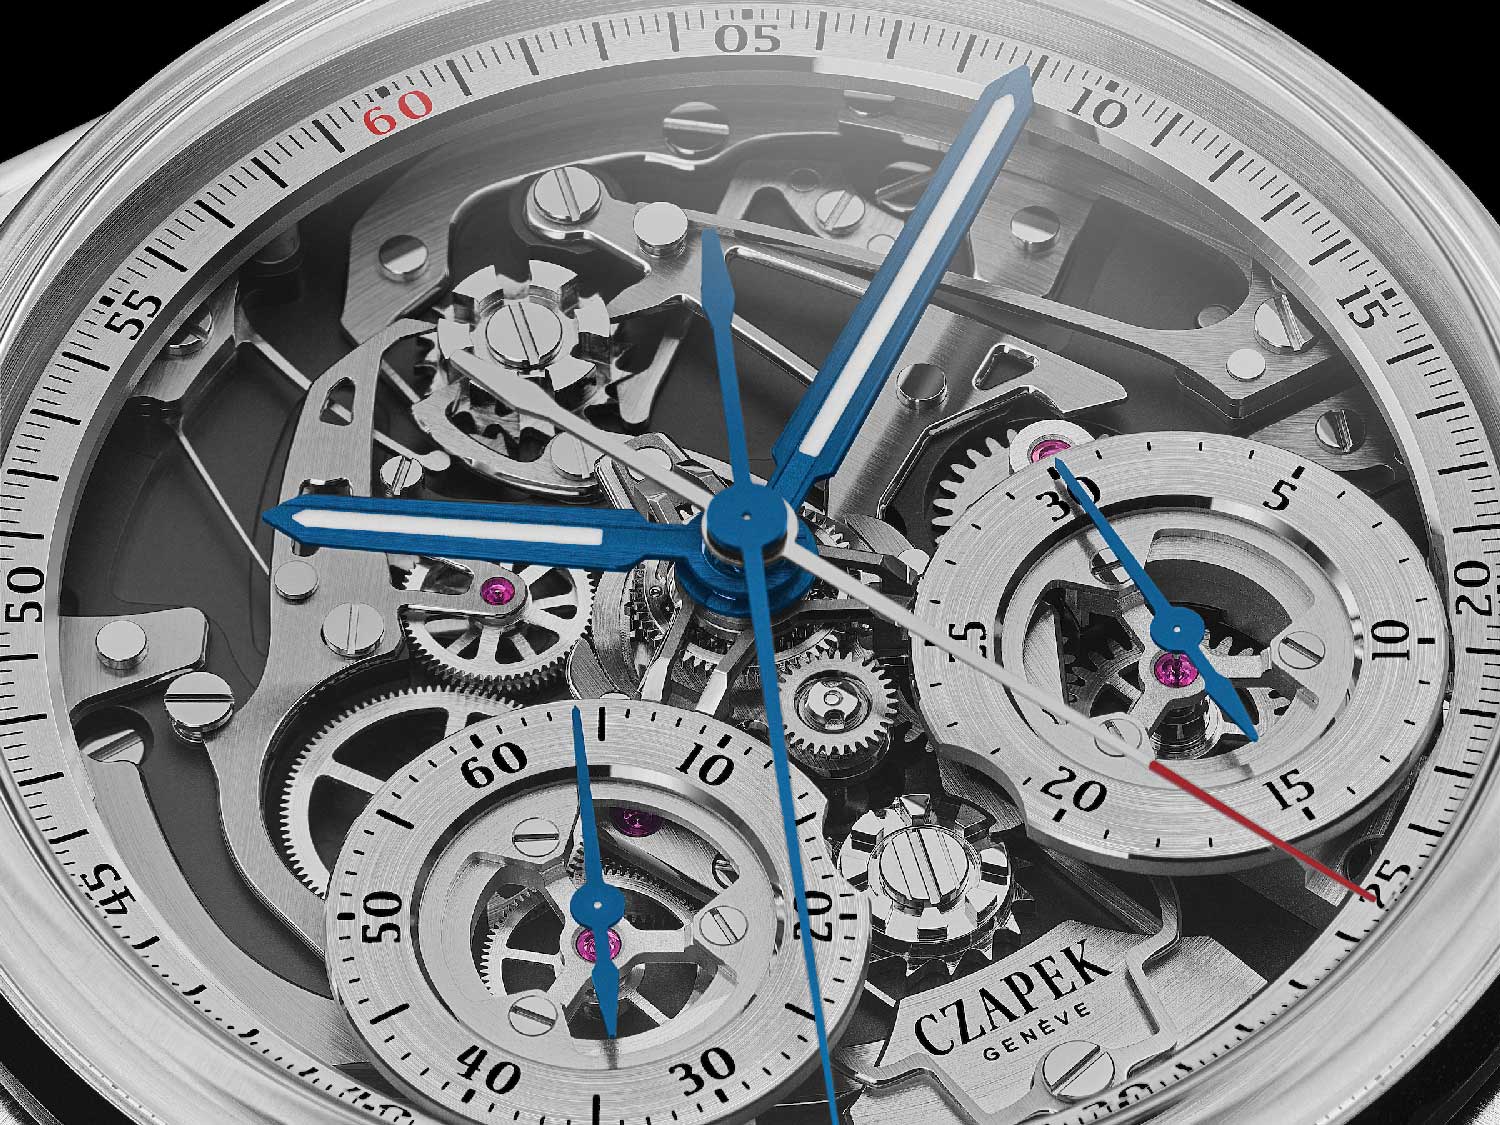 The new automatic SHX6 caliber showcases the split-seconds mechanism on the front side for the first time. A couple of column wheels are in charge of controlling the chrono operation. The tripod in the middle serves as the structural center for the gear train (above) and the split-secs assembly (below).